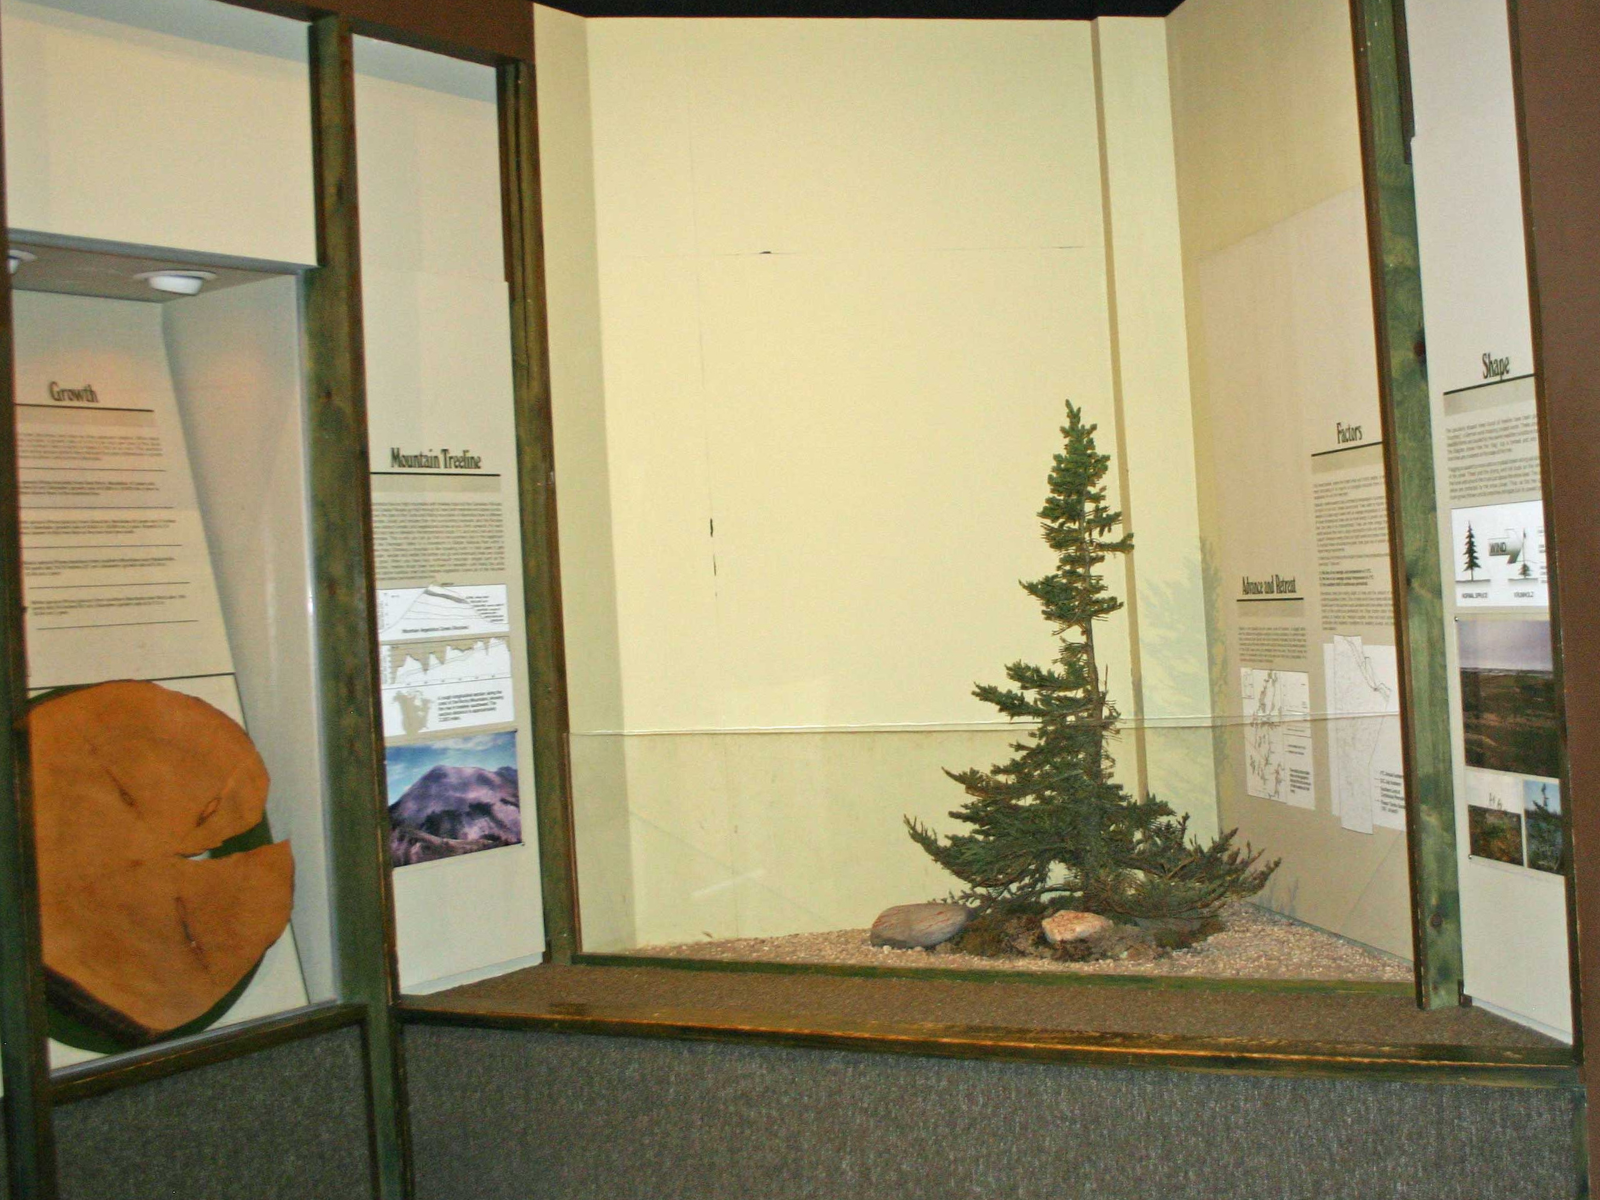 A Museum display case containing a small spruce tree with most of the branches growing on one side. The tree is behind plexiglass in a corner display case in front of a blank yellow-beige wall.